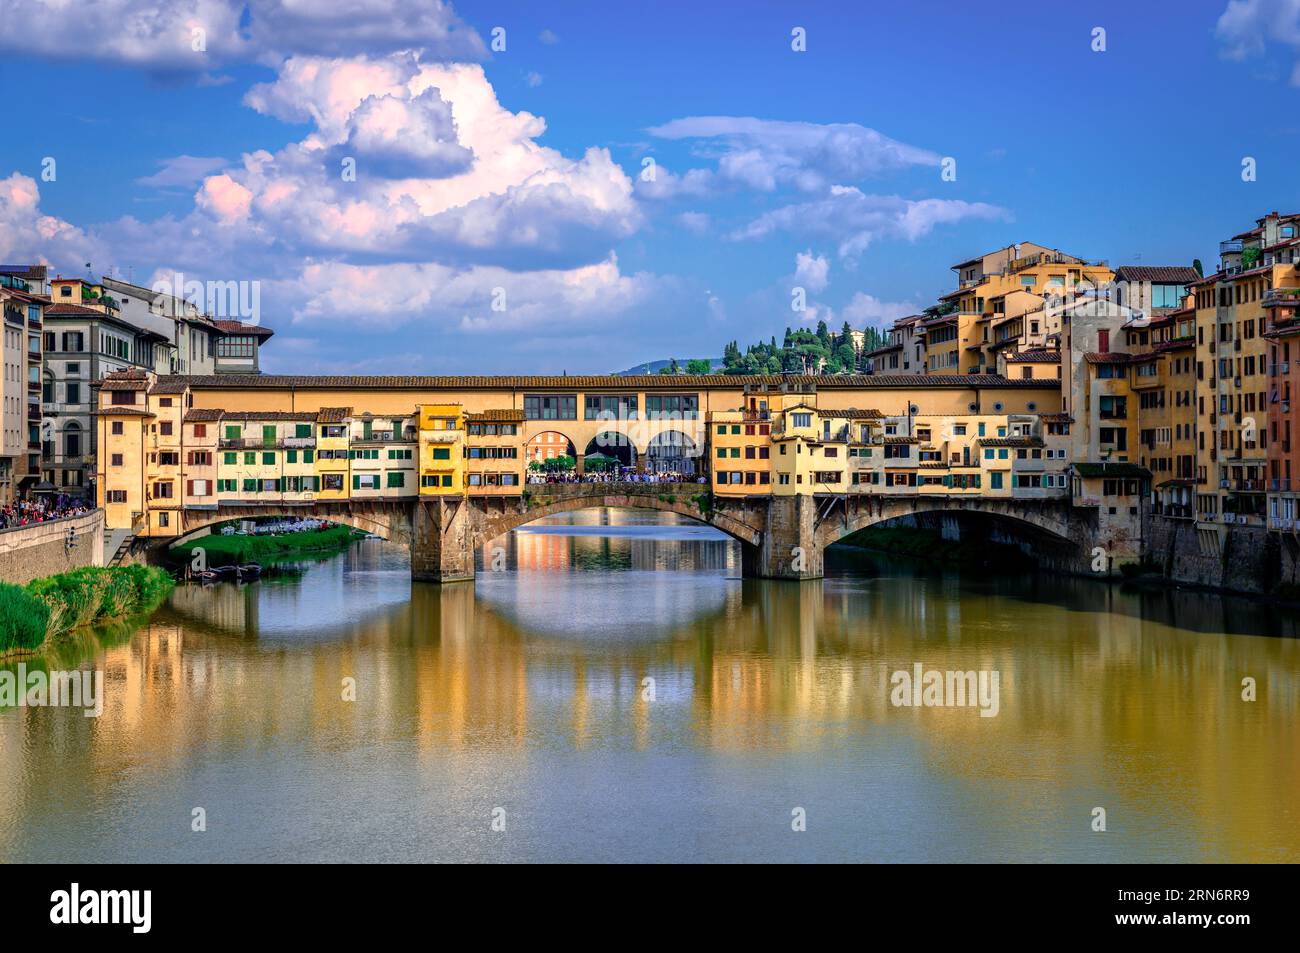 Ponte Vecchio (old Bridge) in Florence, Italy. This medieval stone bridge that spans river Arno, consists of three segmental arches and it has always Stock Photo